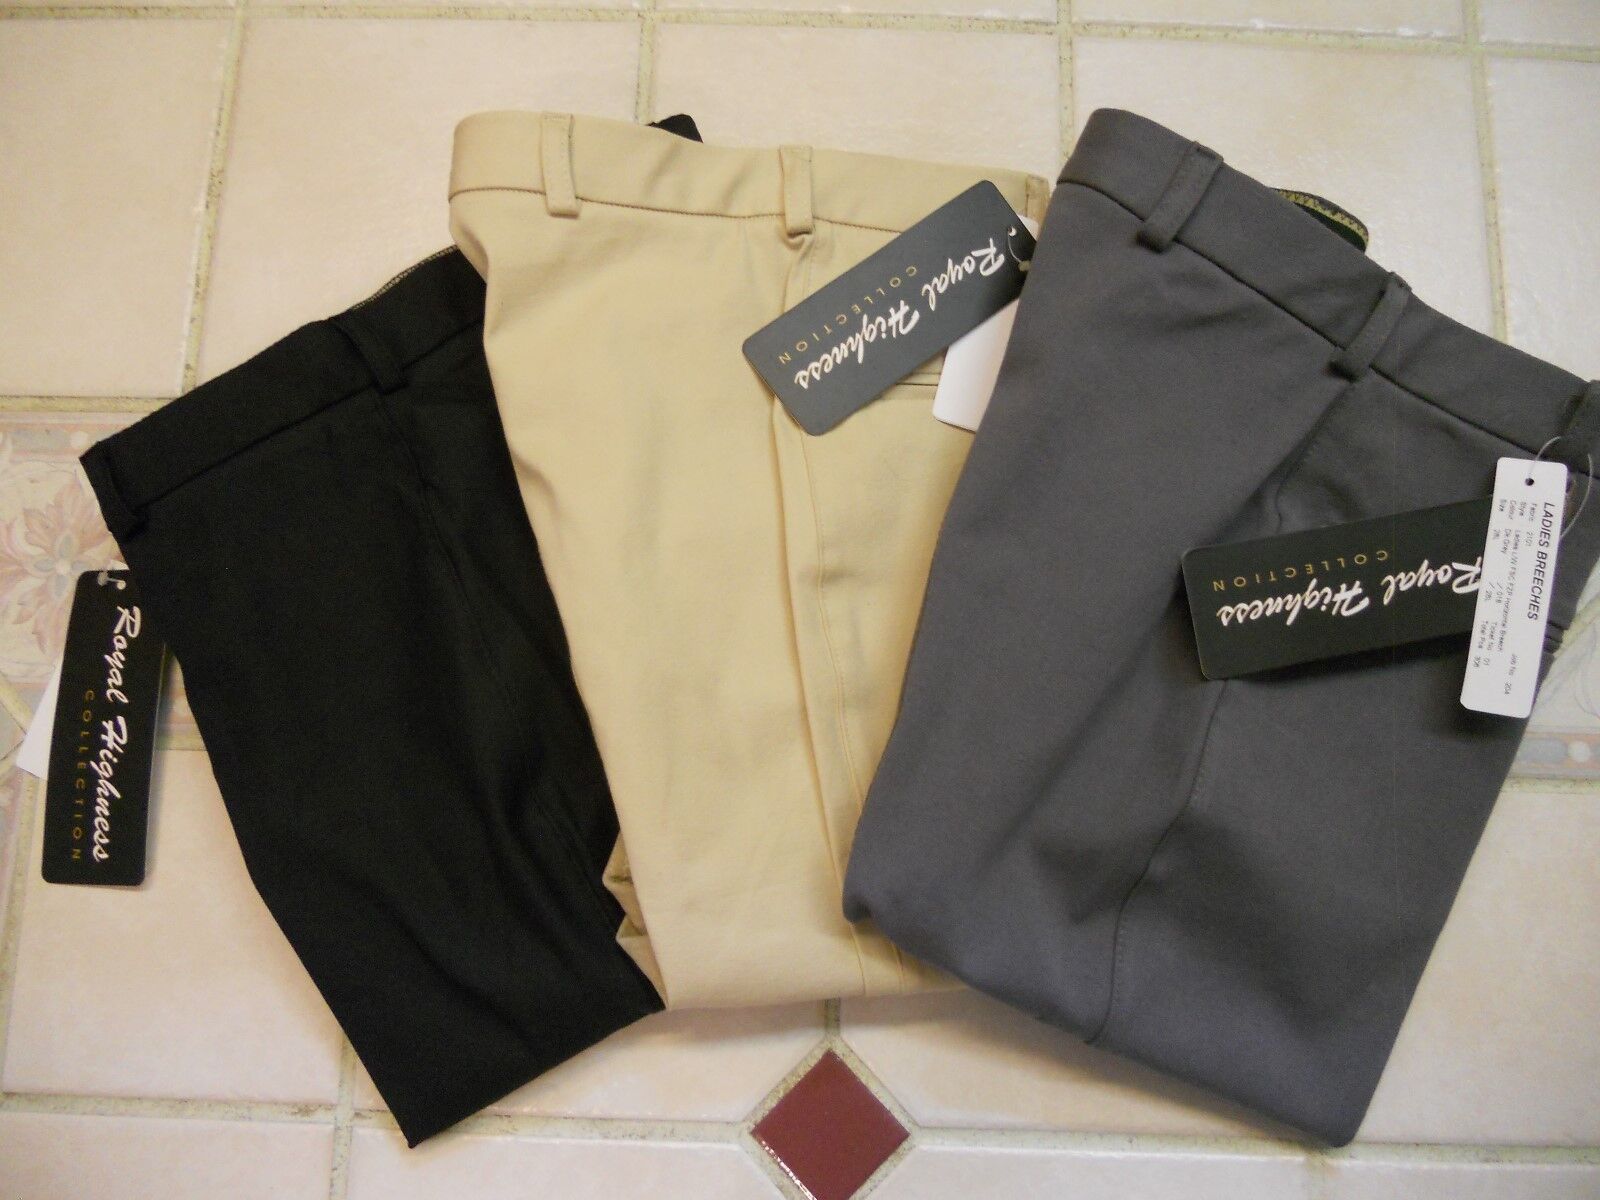 Ladies Royal Highness Knee Clearance SALE Limited time Inventory cleanup selling sale Patch and Gray Breeches Beige Black